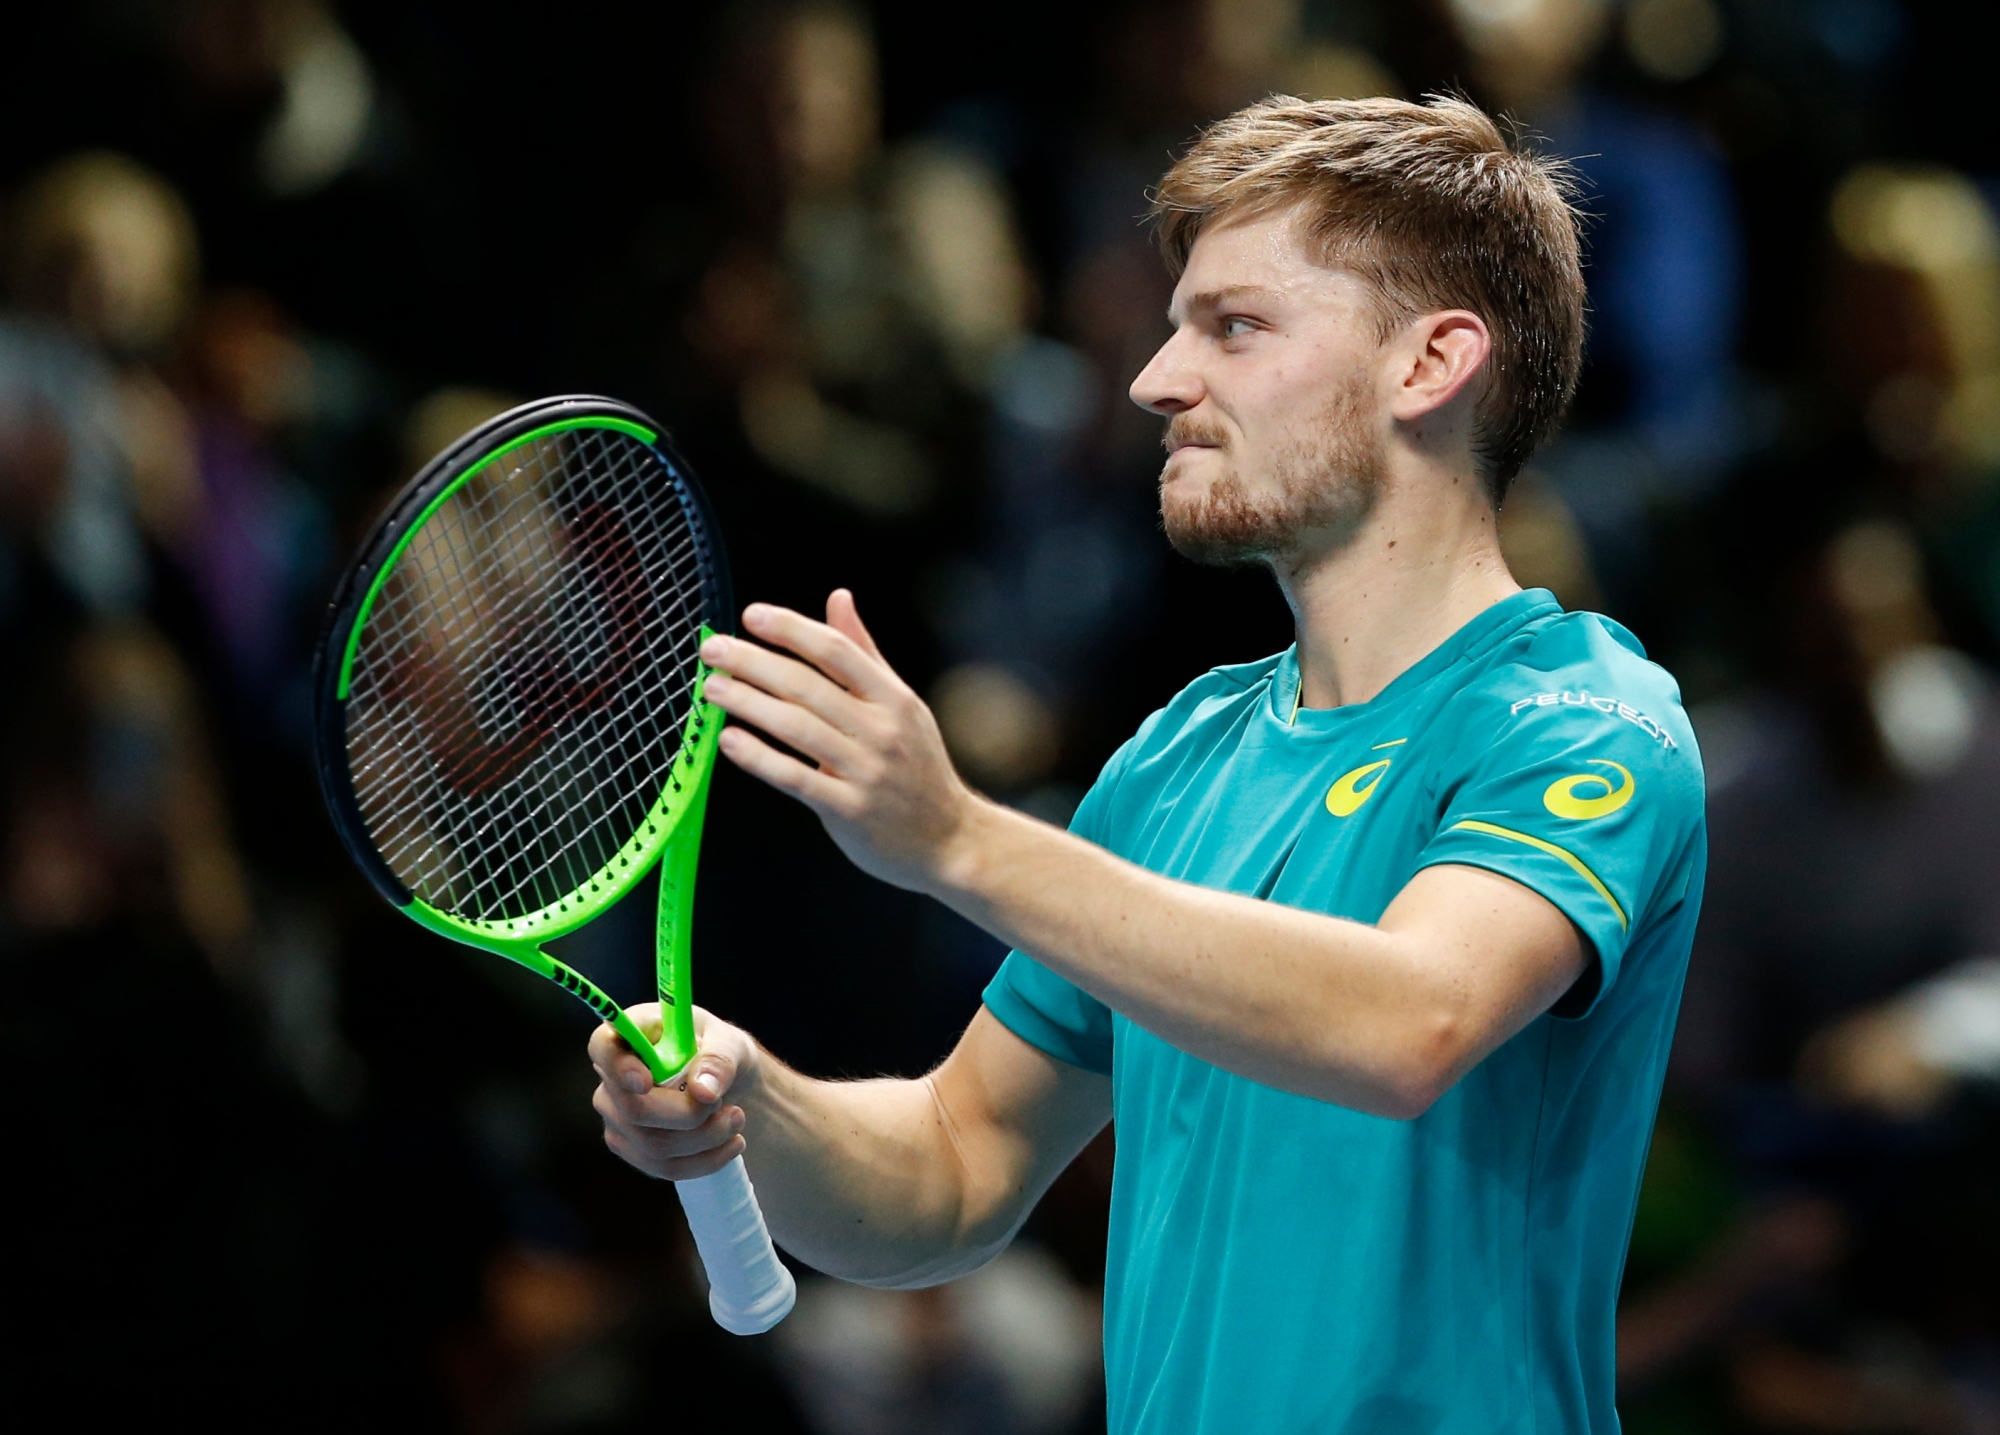 David Goffin of Belgium celebrates after defeating Dominic Thiem of Austria in their men's singles tennis match at the ATP World Finals at the O2 Arena in London, Friday, Nov. 17, 2017. (AP Photo/Alastair Grant) Britain Tennis ATP Finals